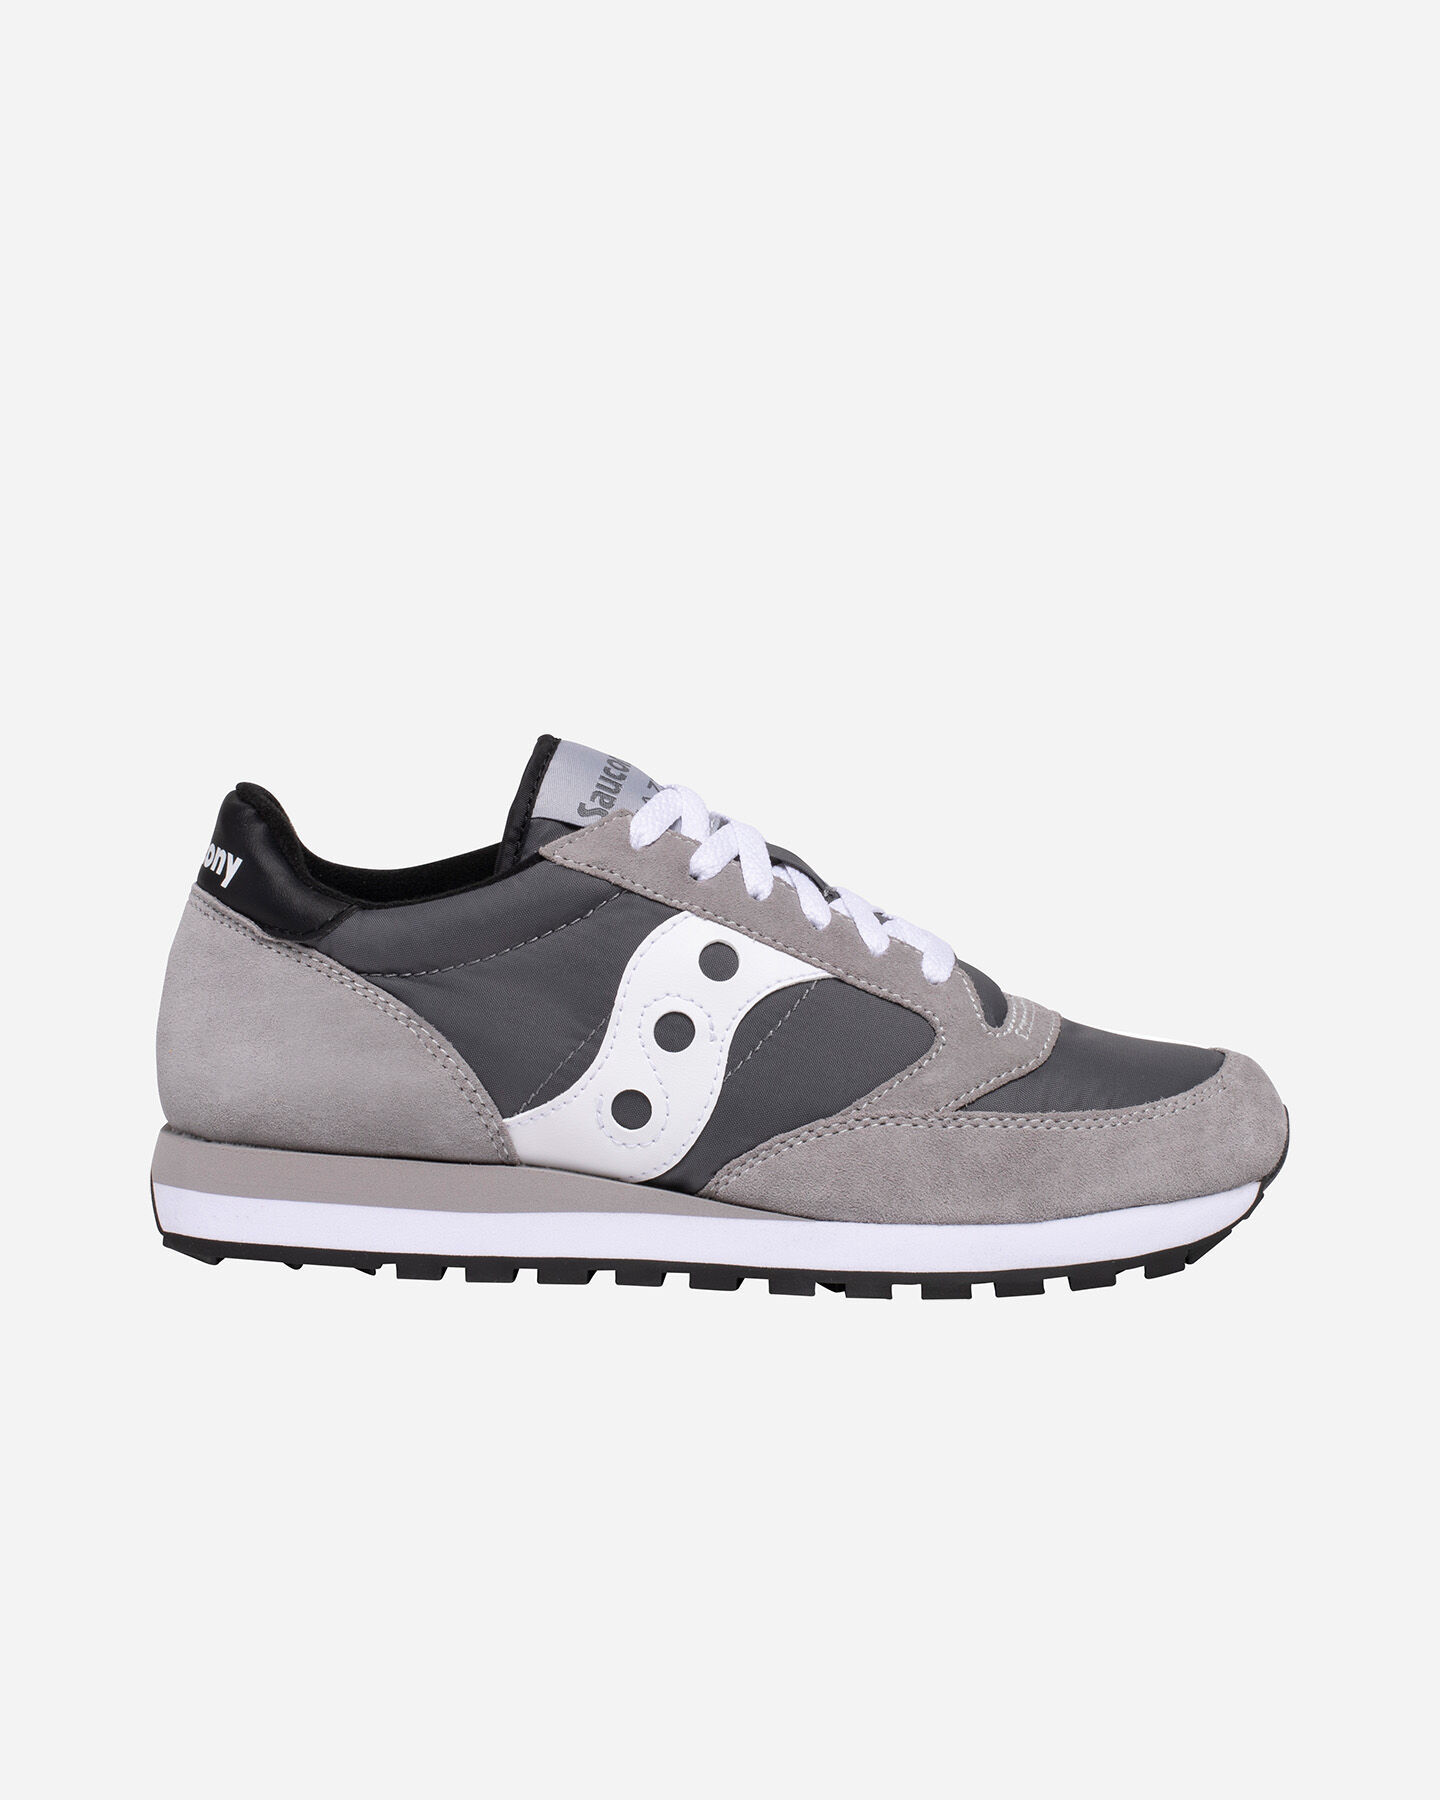  Scarpe sneakers SAUCONY JAZZ O S5249765 scatto 0